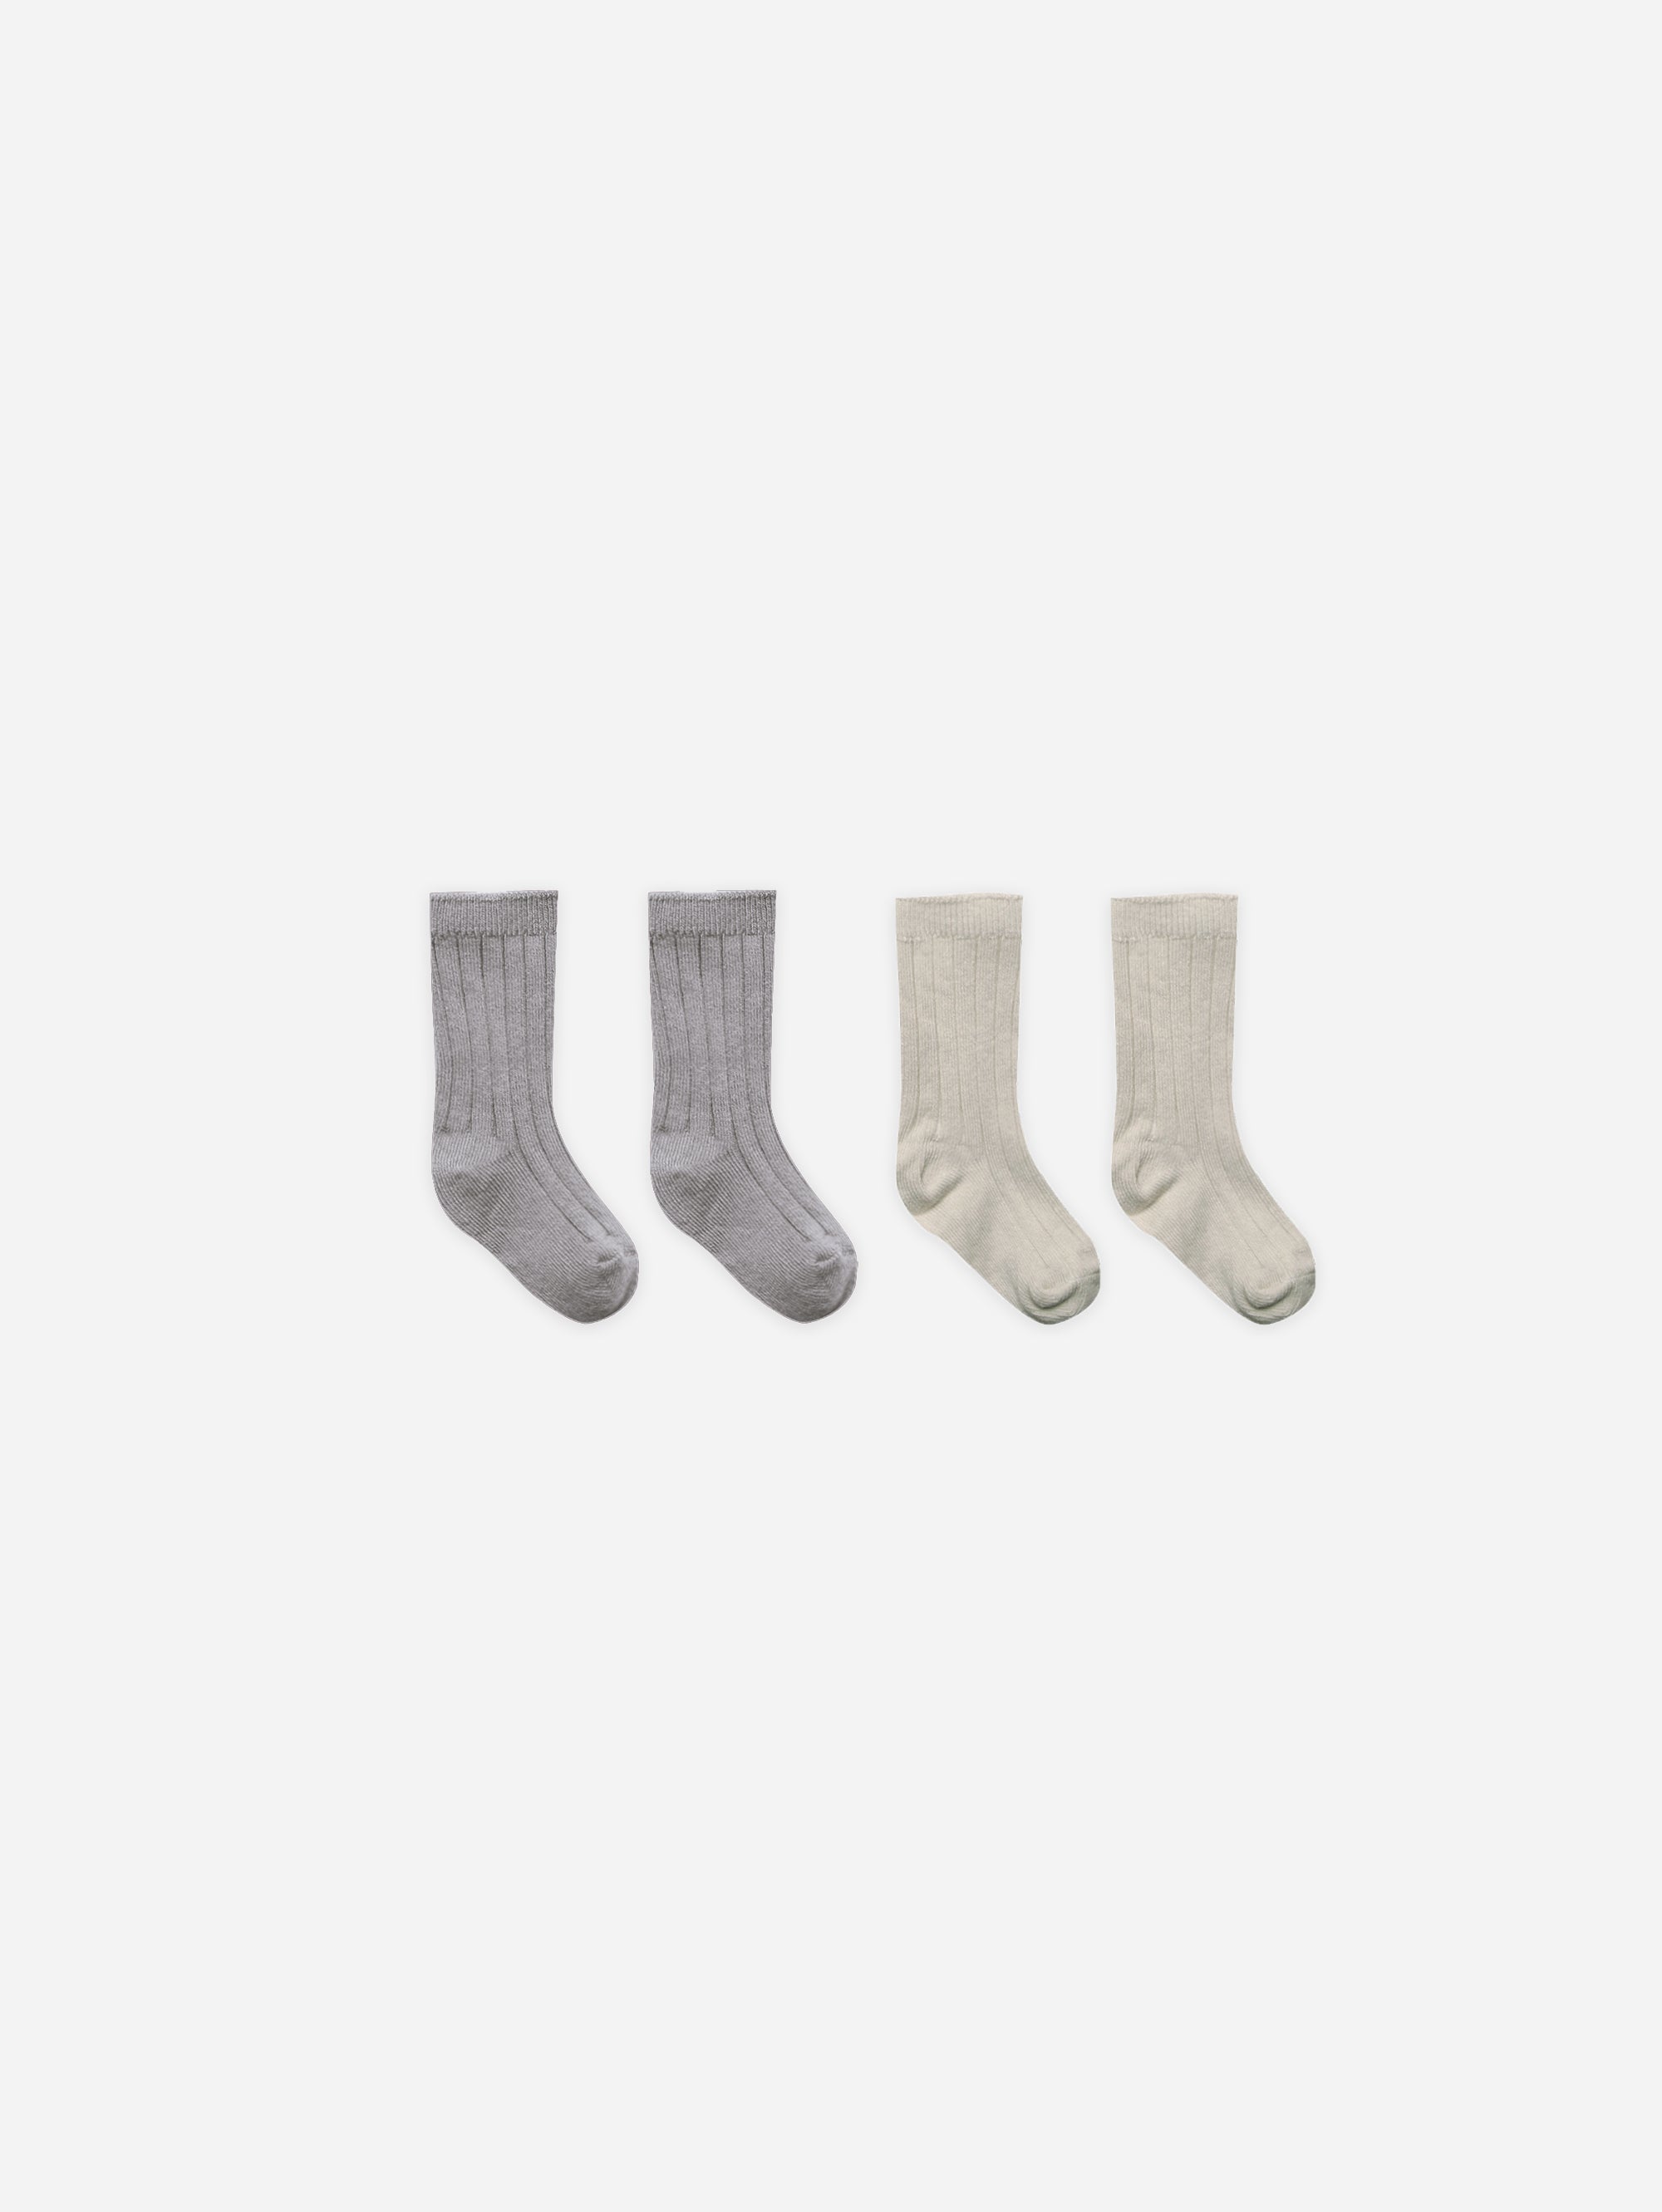 Sock Set || Lagoon, Ash - Rylee + Cru | Kids Clothes | Trendy Baby Clothes | Modern Infant Outfits |